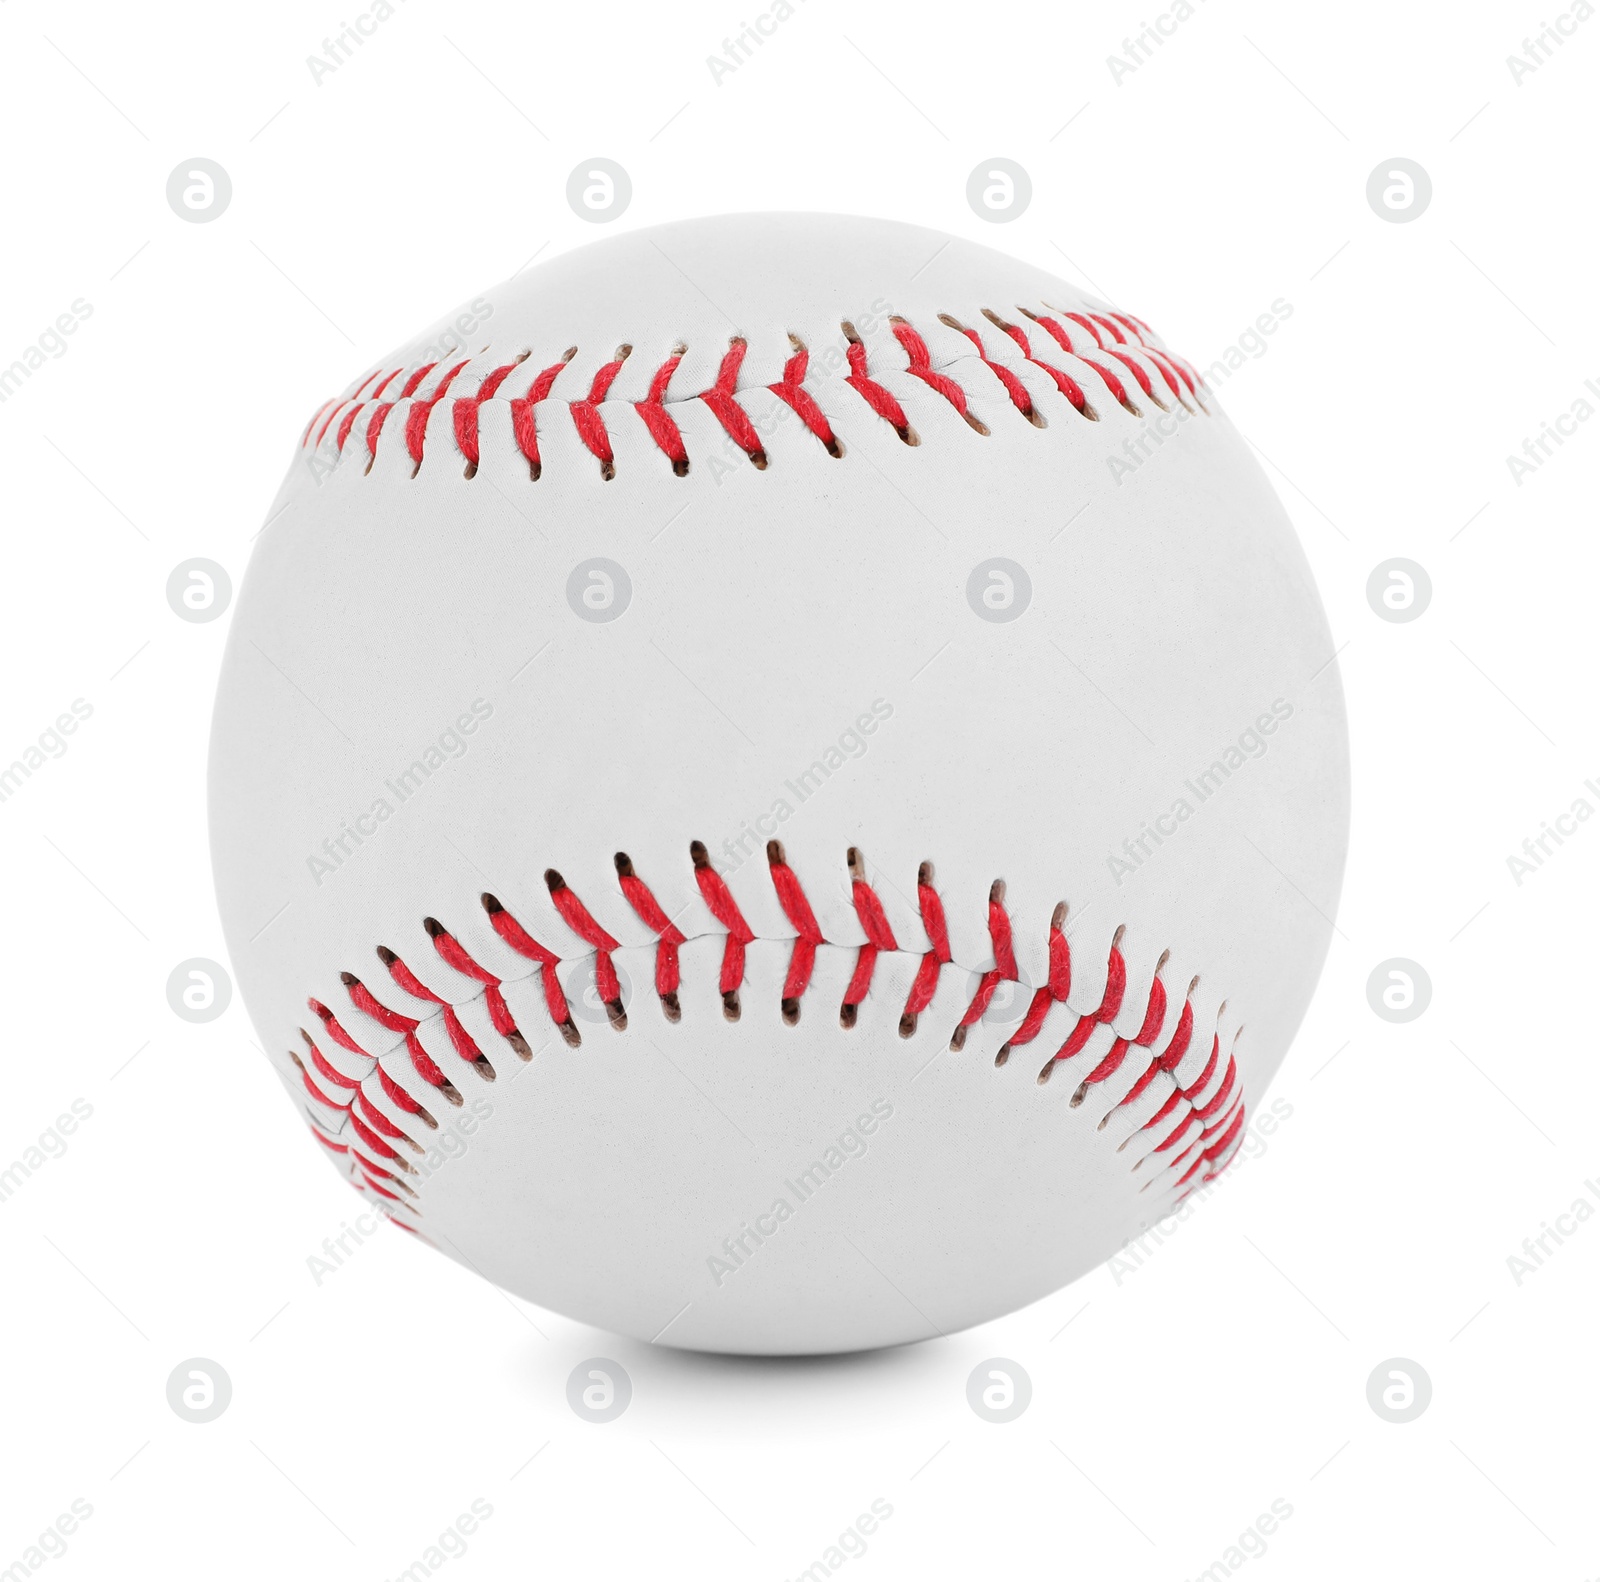 Photo of New traditional baseball ball isolated on white